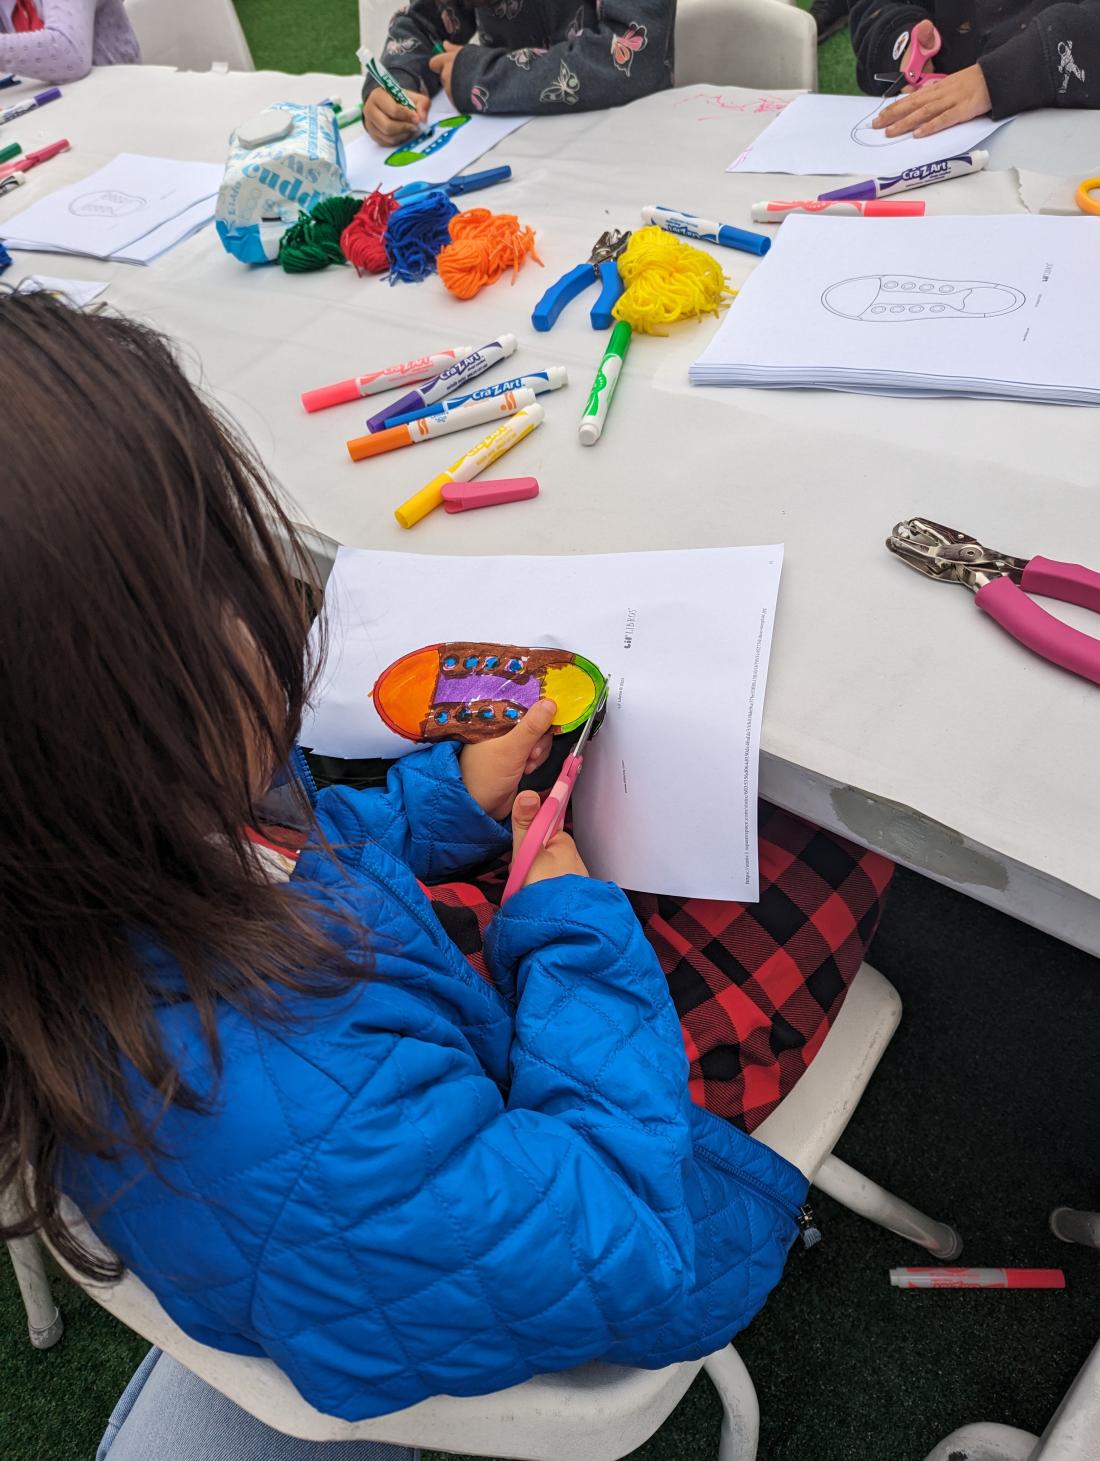 Child cutting a piece of paper for an art activity